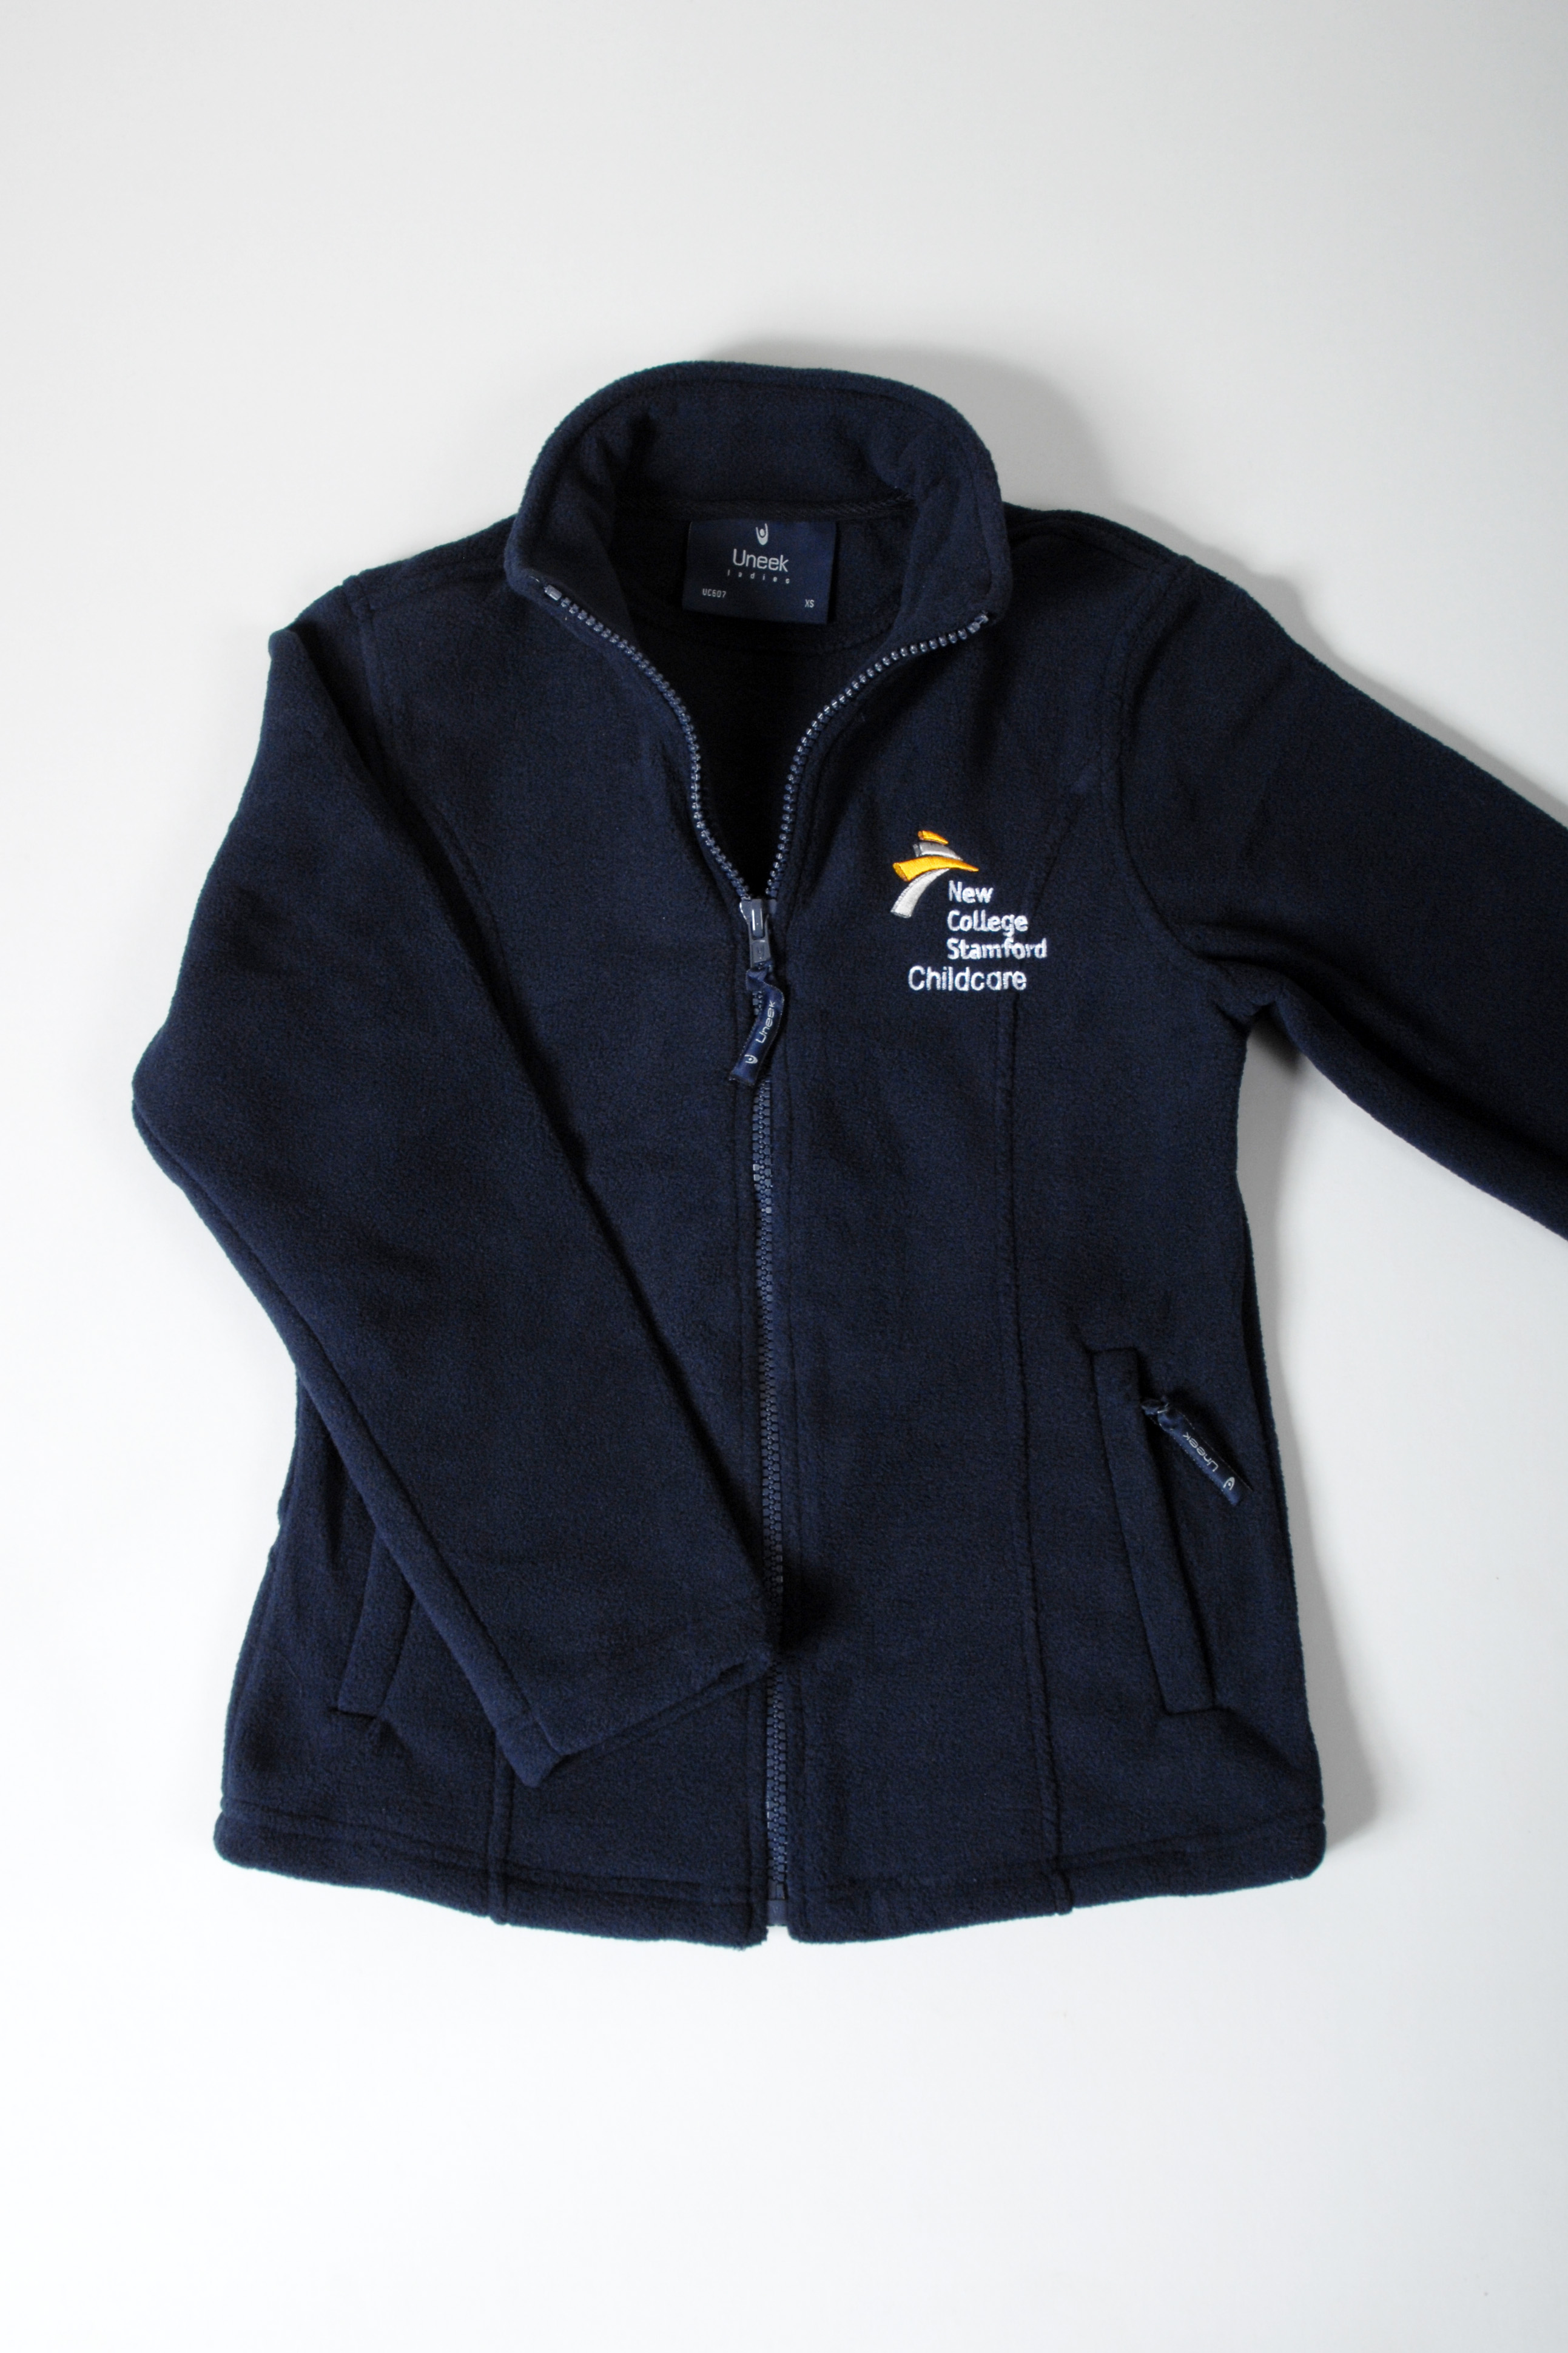 Ladies Fleece Jacket with Childcare Logo - Navy, 2XL (to fit 40")